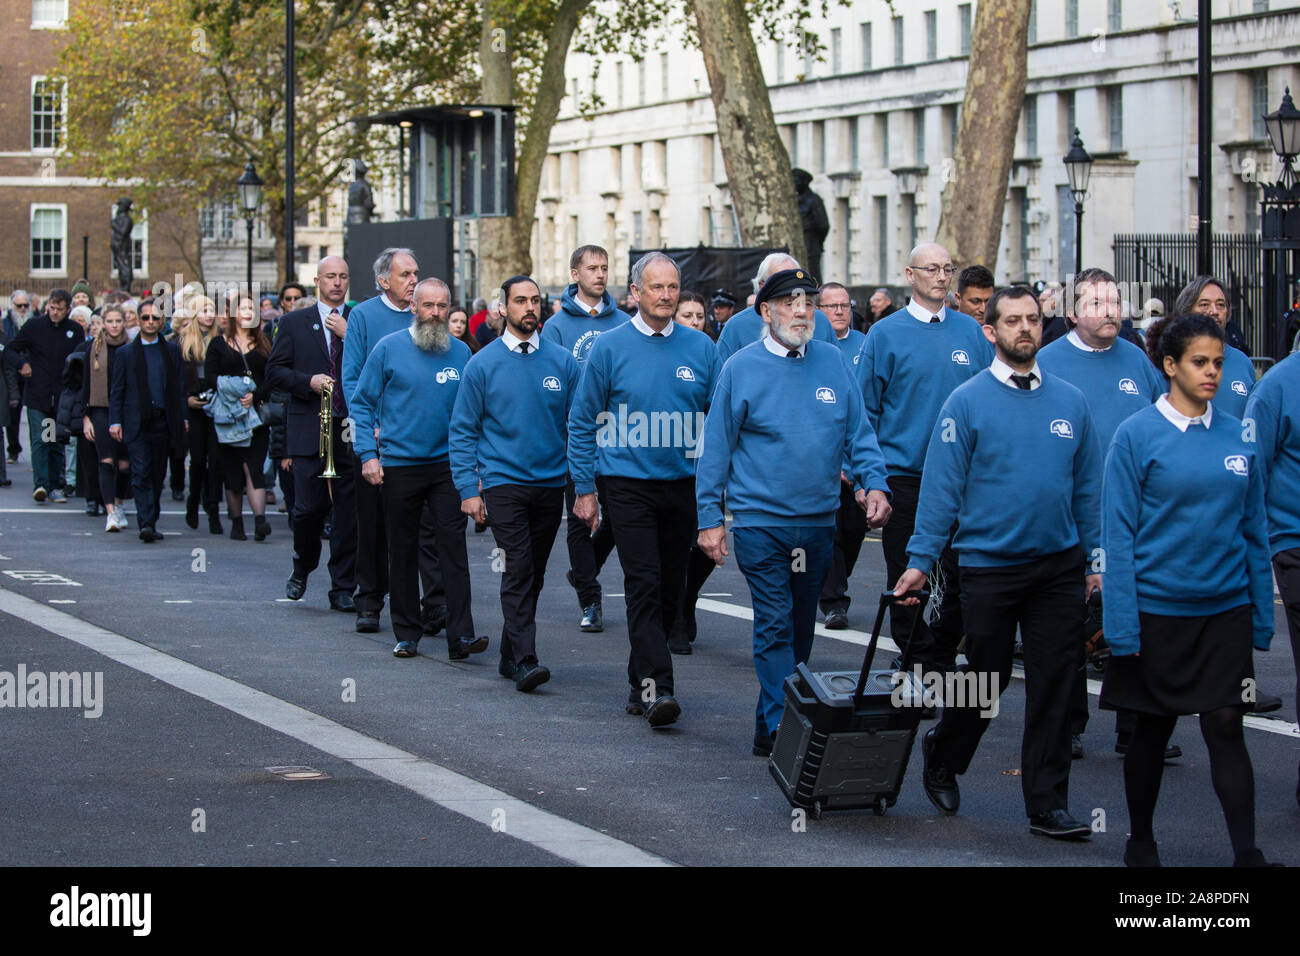 London, UK. 10 November, 2019. Ex-services personnel from Veterans For Peace UK (VFP UK) take part in the Remembrance Sunday ceremony in Whitehall, followed by their families. VFP UK was founded in 2011 and works to influence the foreign and defence policy of the UK for the larger purpose of world peace. Credit: Mark Kerrison/Alamy Live News Stock Photo